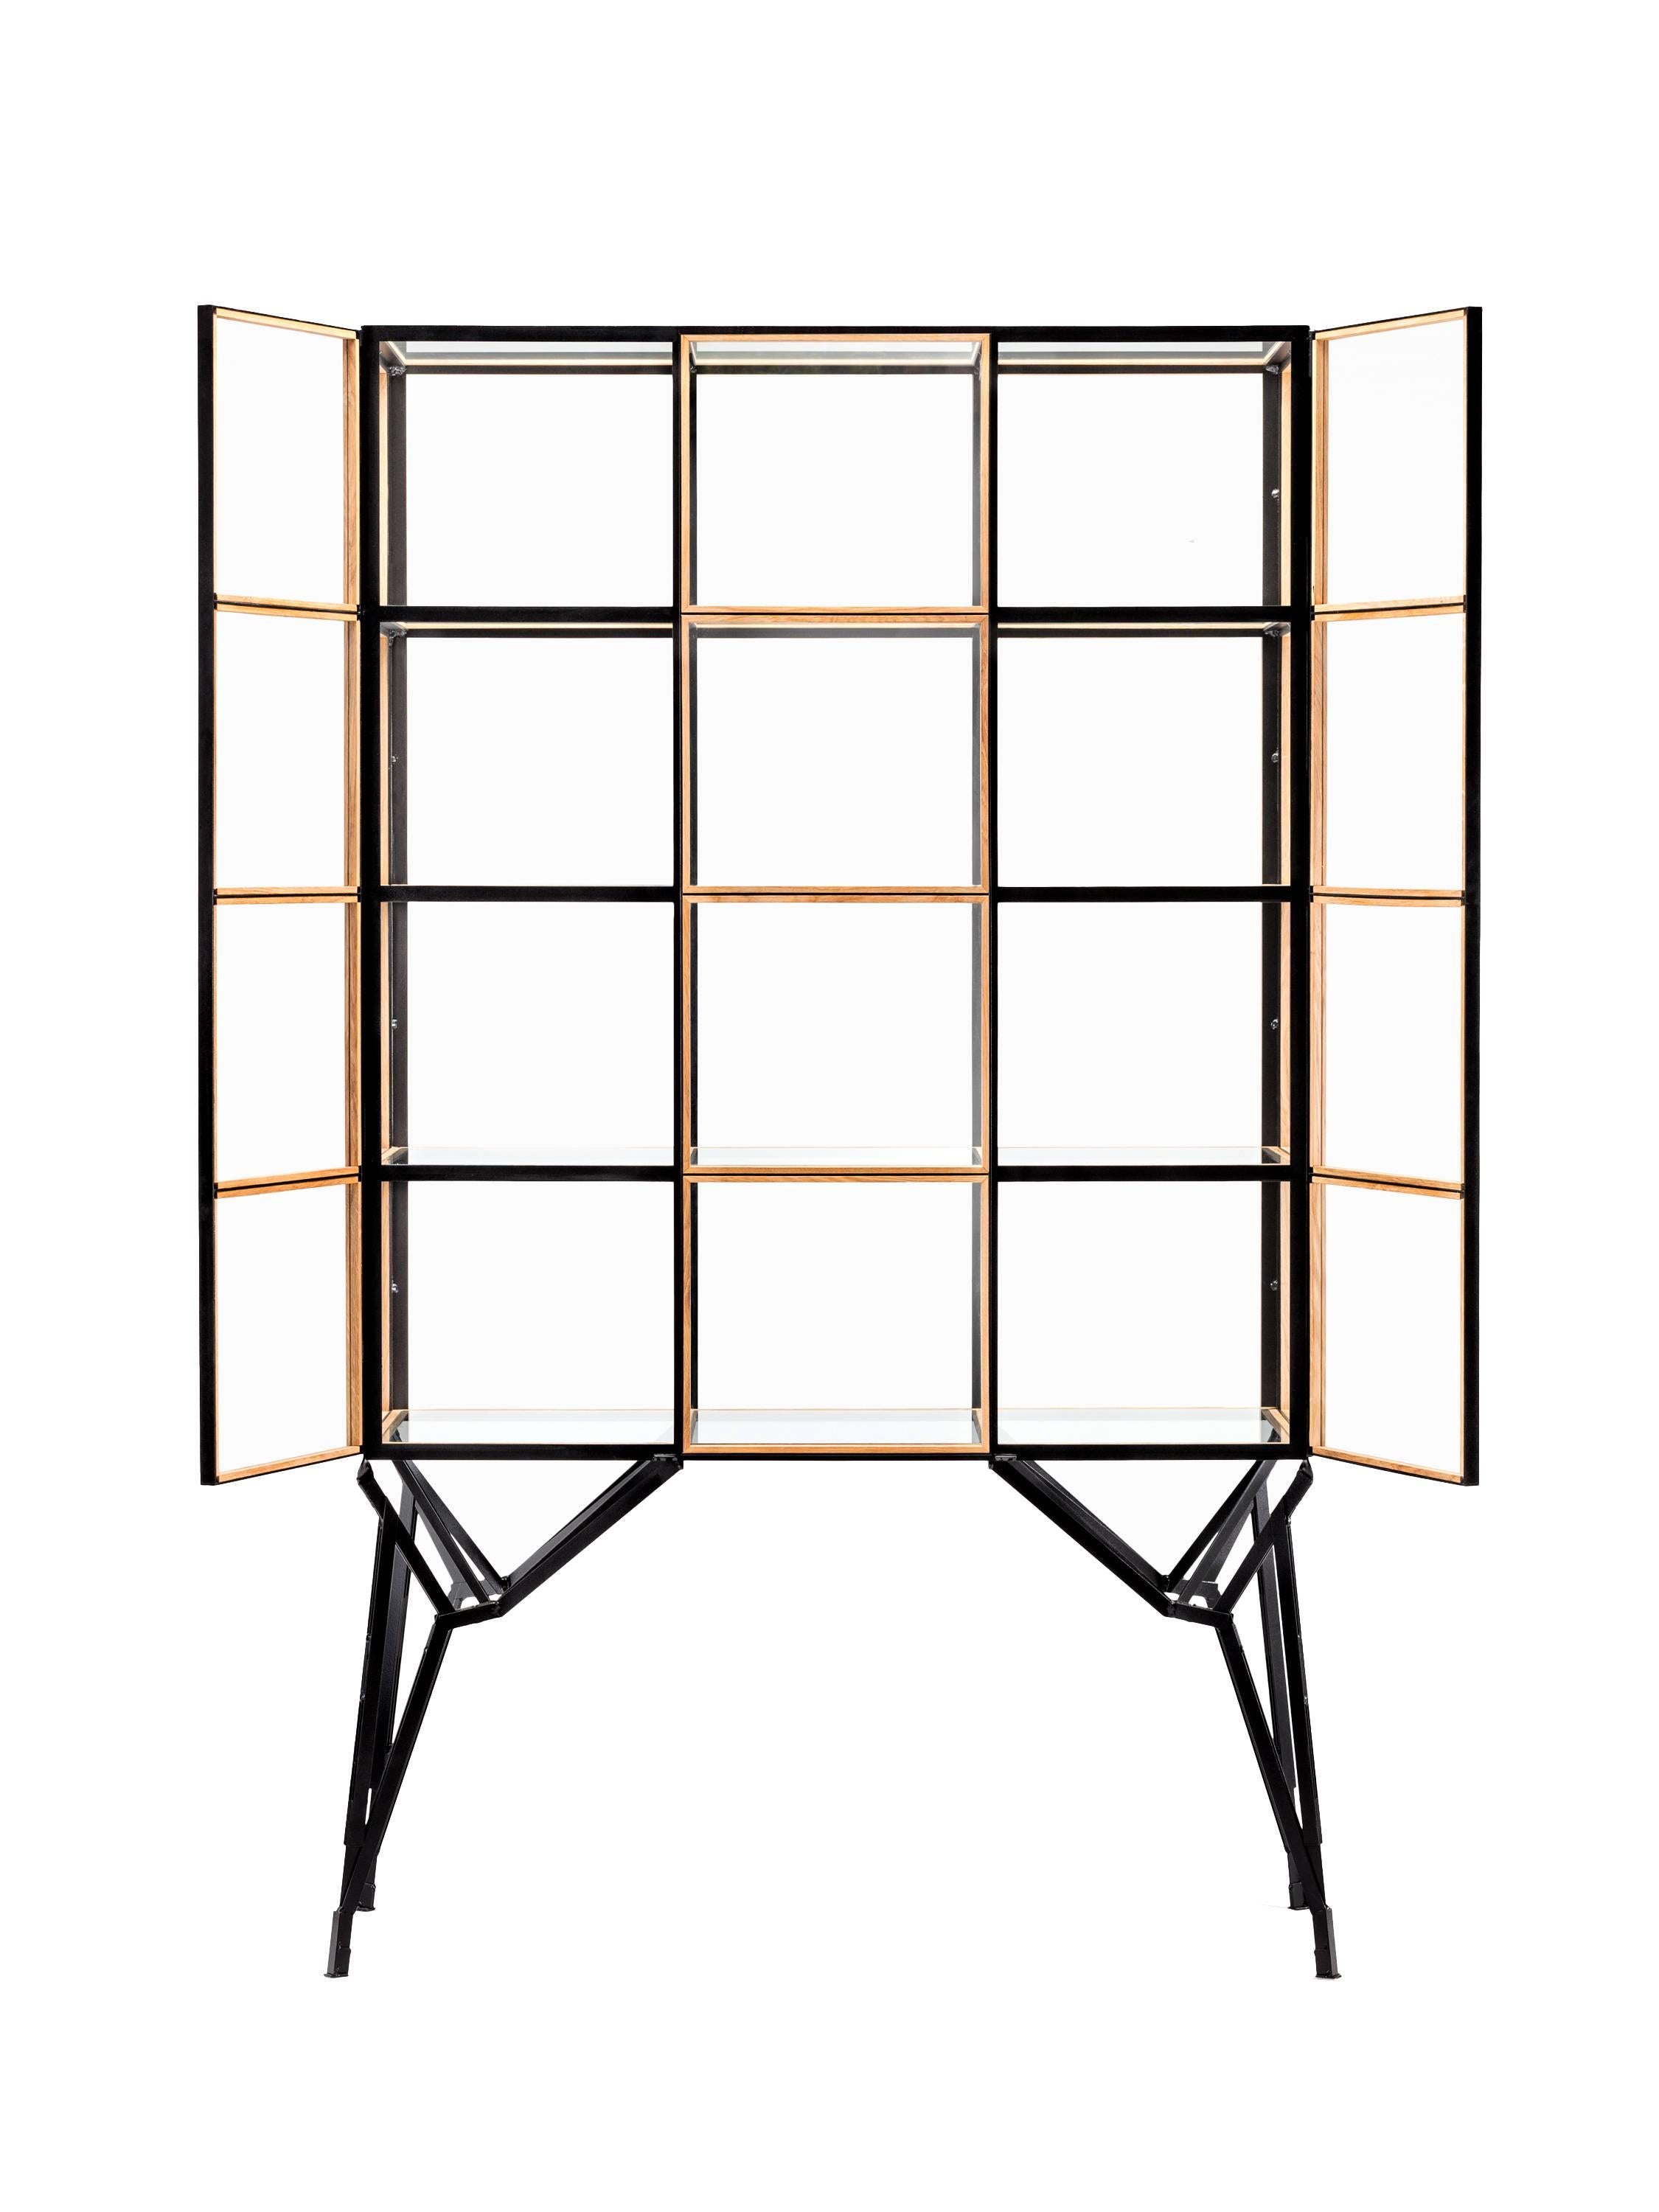 A timeless cabinet with a modular design and concealed doors to display treasured items.
Inspired on the demolished Philips factory buildings of Eindhoven and their windows.
Handcrafted wooden glass-slats holding glass panels set in a ingeniously